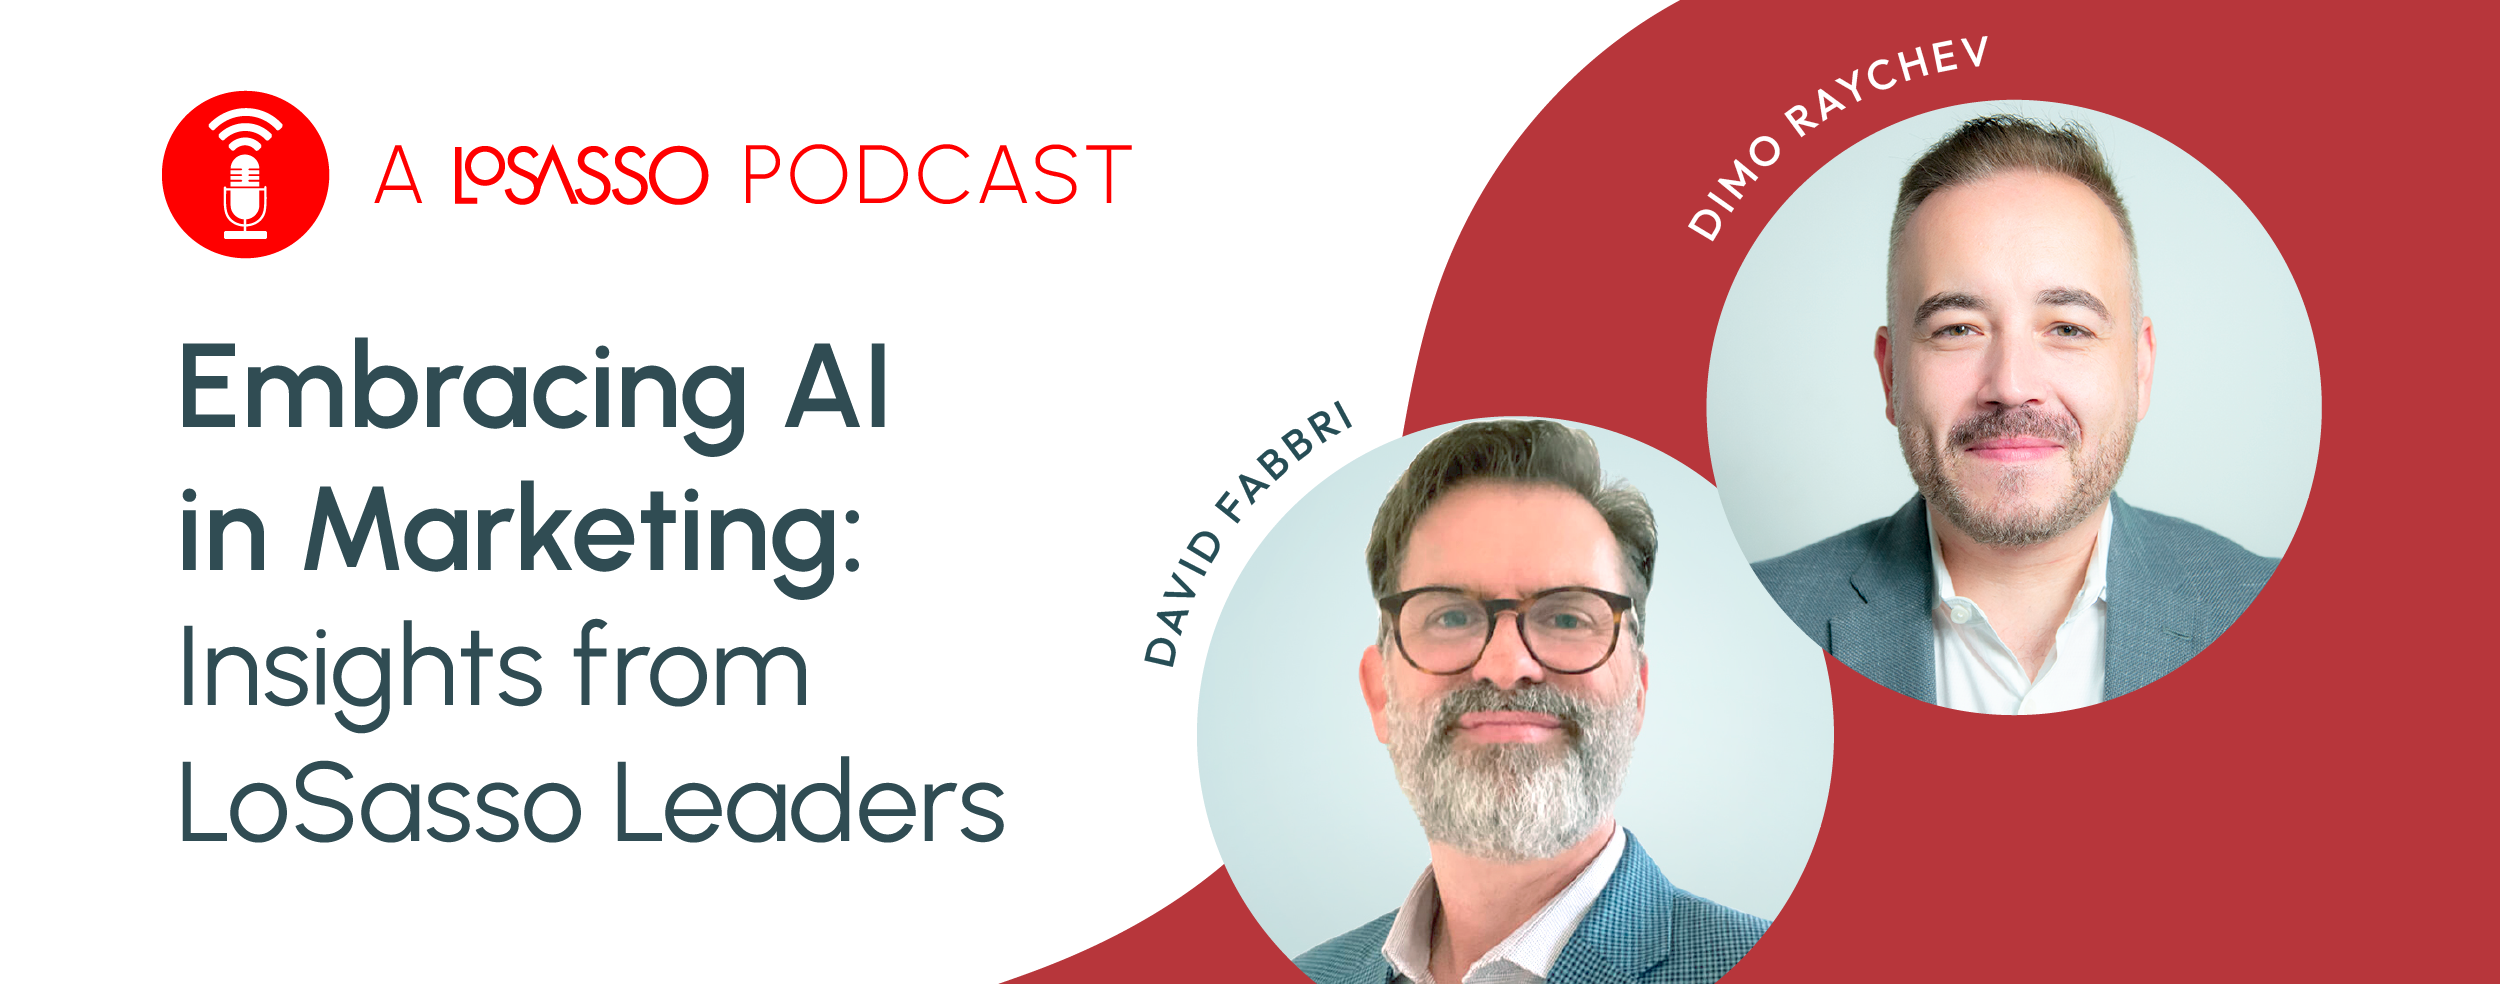 Embracing AI in Marketing: Insights from LoSasso Leaders